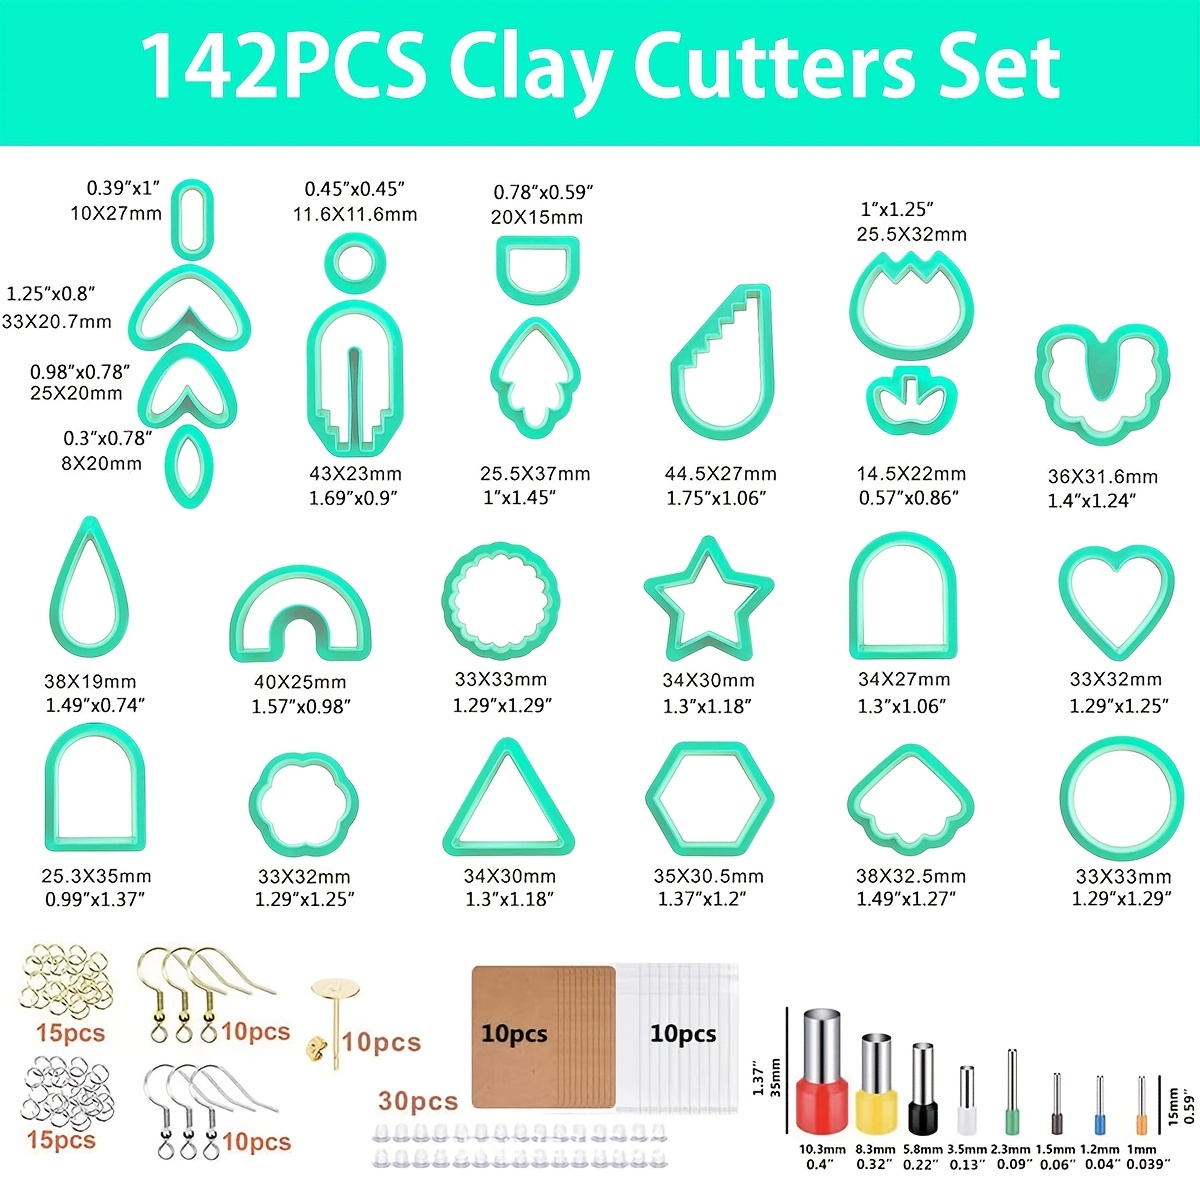 TAINSKY Polymer Clay Cutters Set, 25 Shapes Clay Earring Cutters with 145  Earrings Accessories for Polymer Clay Jewelry Making